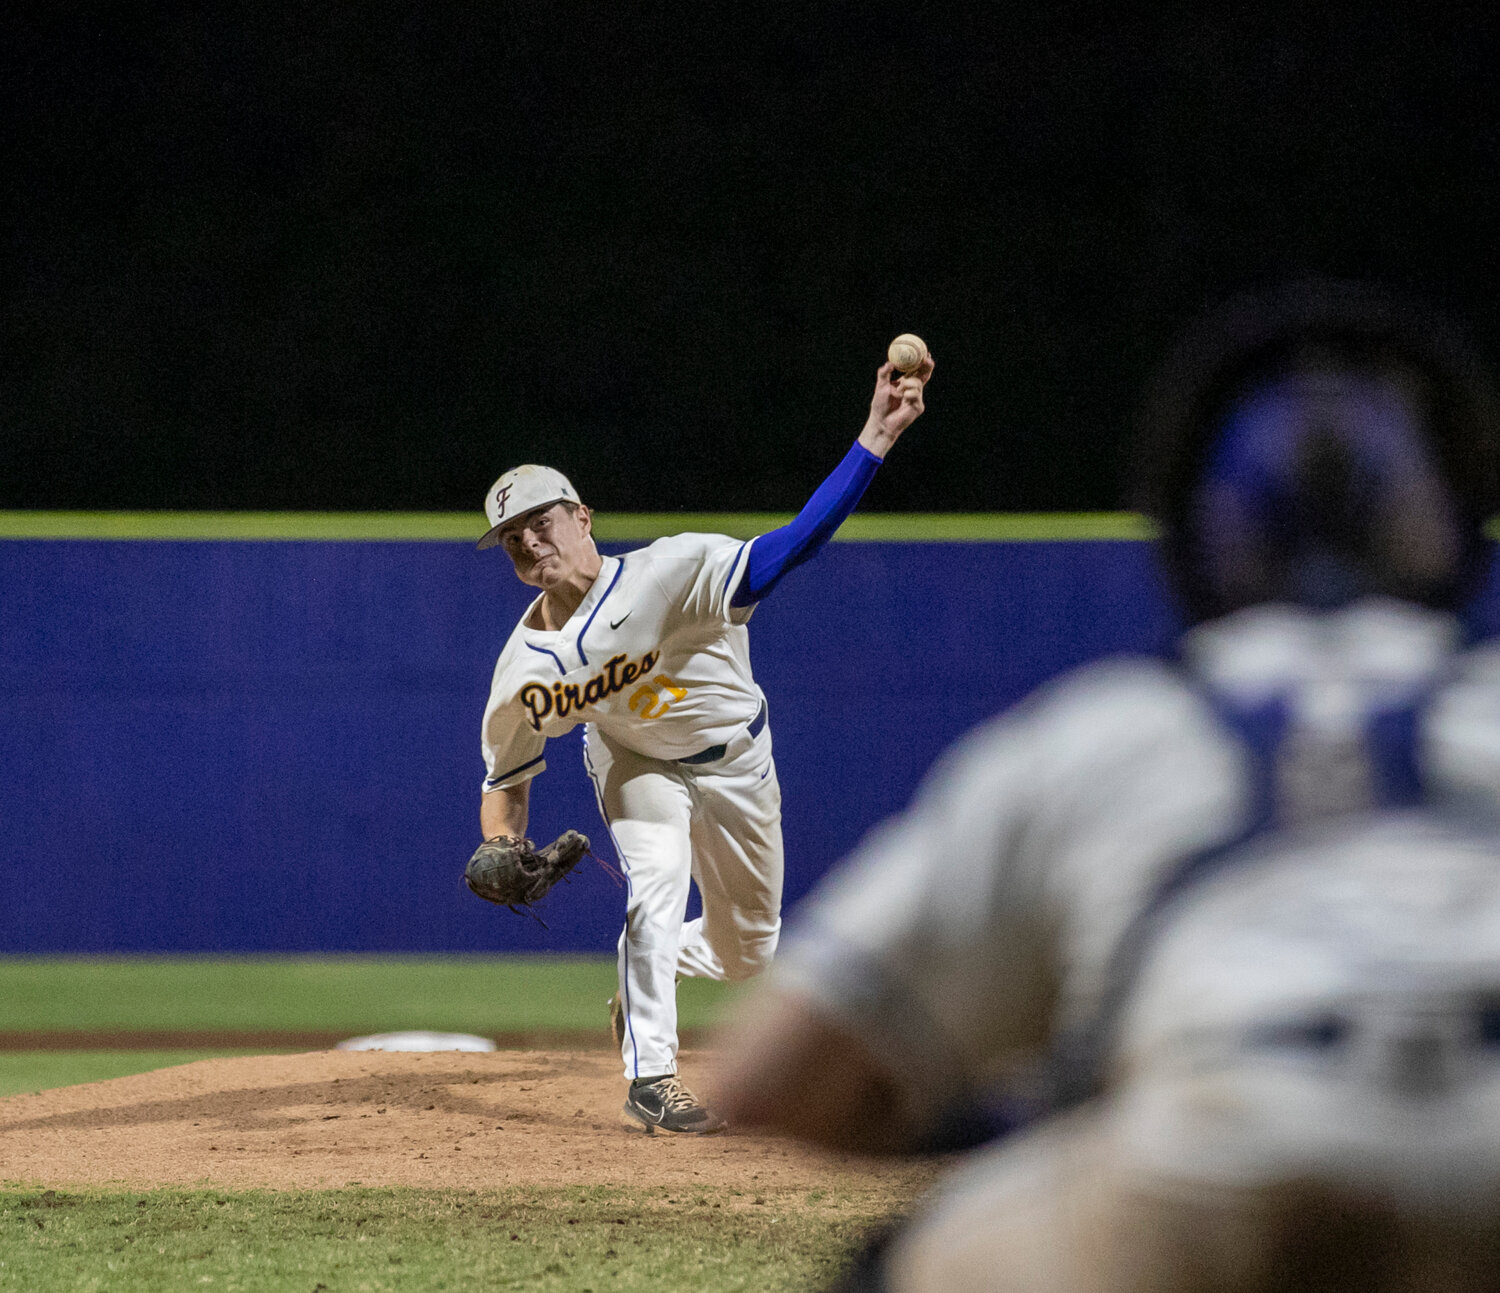 Pirate sophomore Jerry McDowell fires a pitch during his start in Game 2 of Fairhope’s home series against the Smiths Station Panthers to open the postseason Friday, April 28.